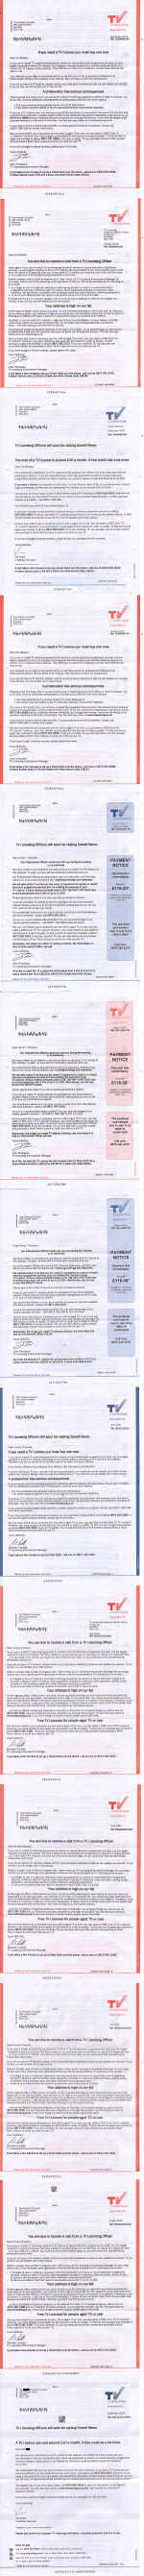 Picture of the letters from Tv Licensing